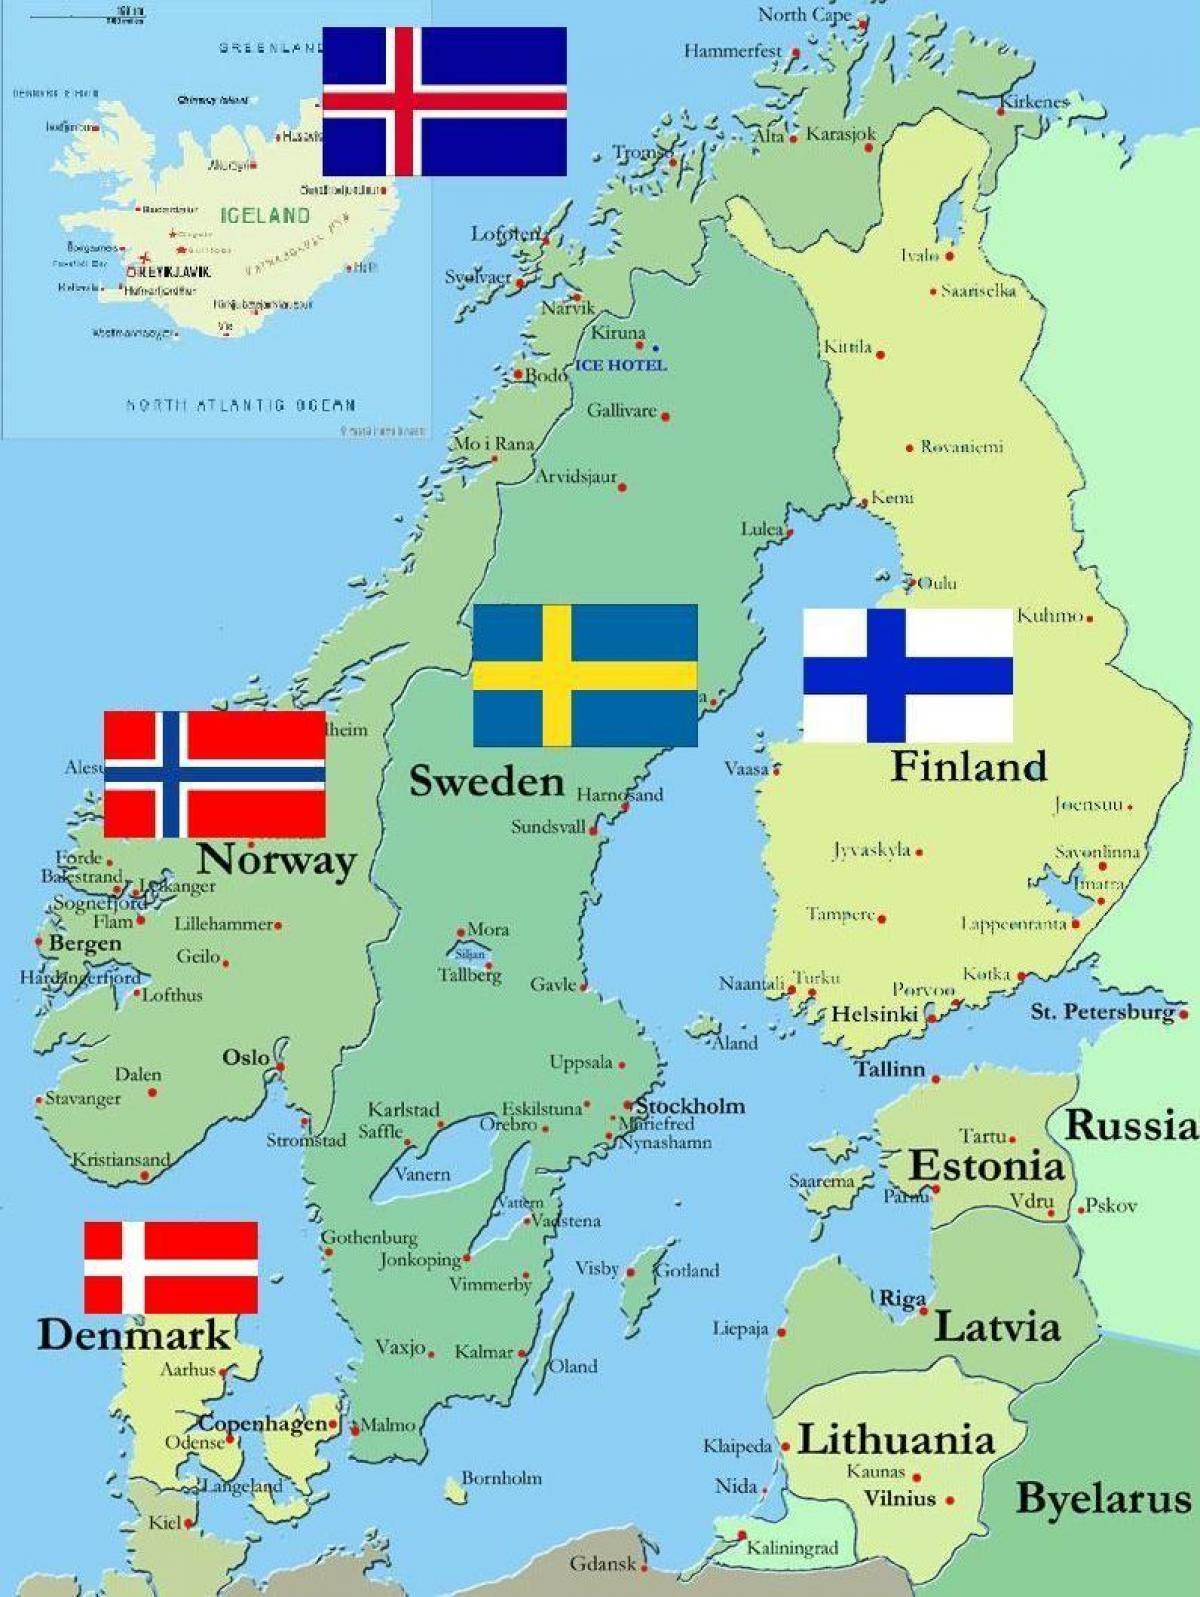 https://maps-sweden.com/img/1200/map-of-sweden-and-surrounding-countries.jpg